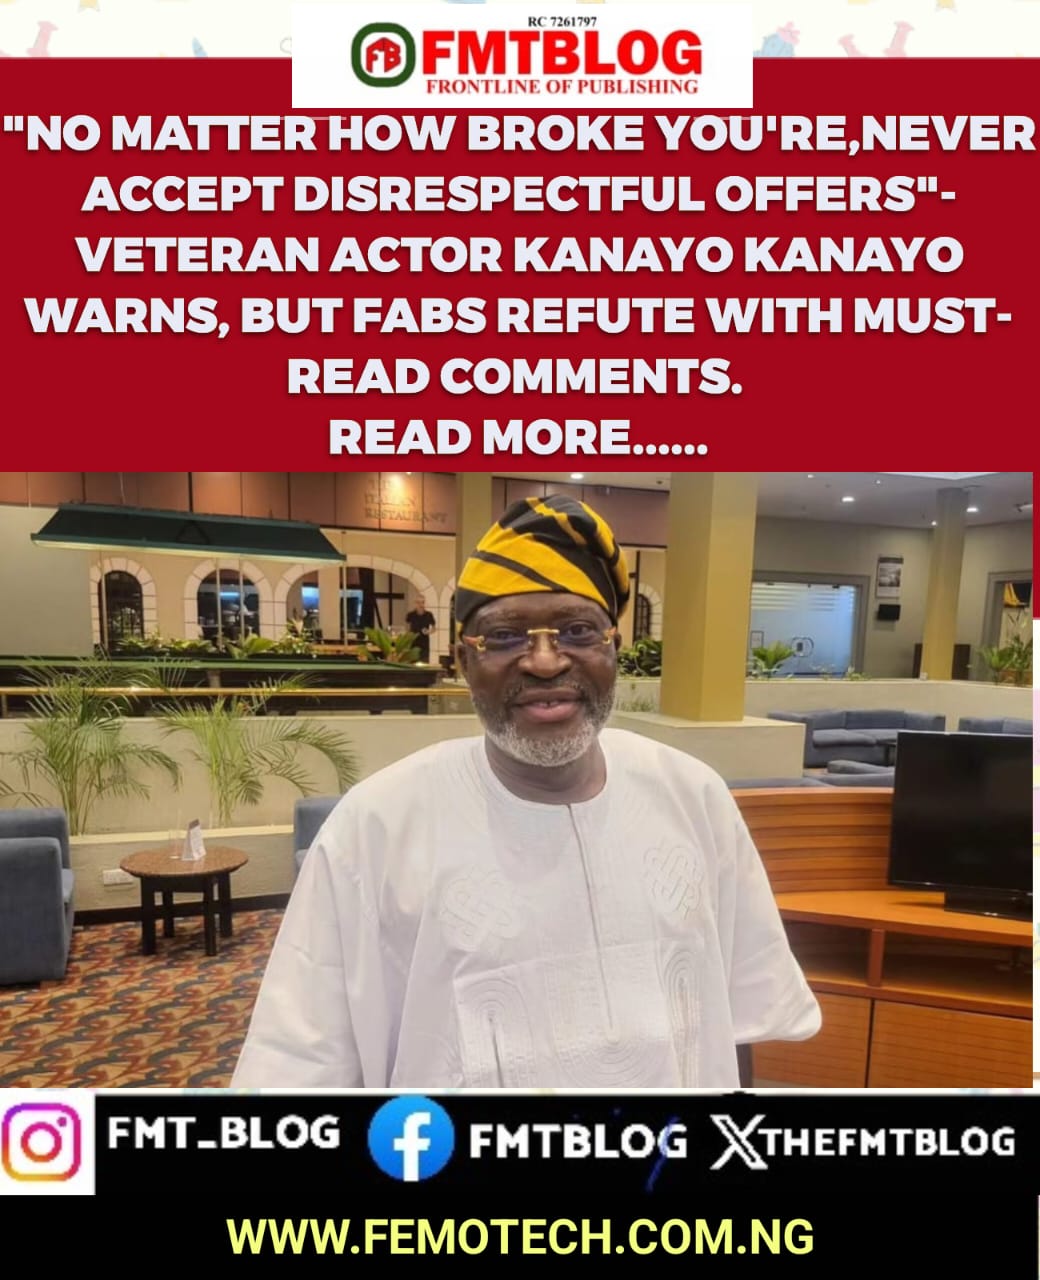 “No Matter How Broke You’re, Never Accept Disrespectful Offers”-Veteran Actor Kanayo Kanayo Warns, But Fans Refute With Must-Read Comments